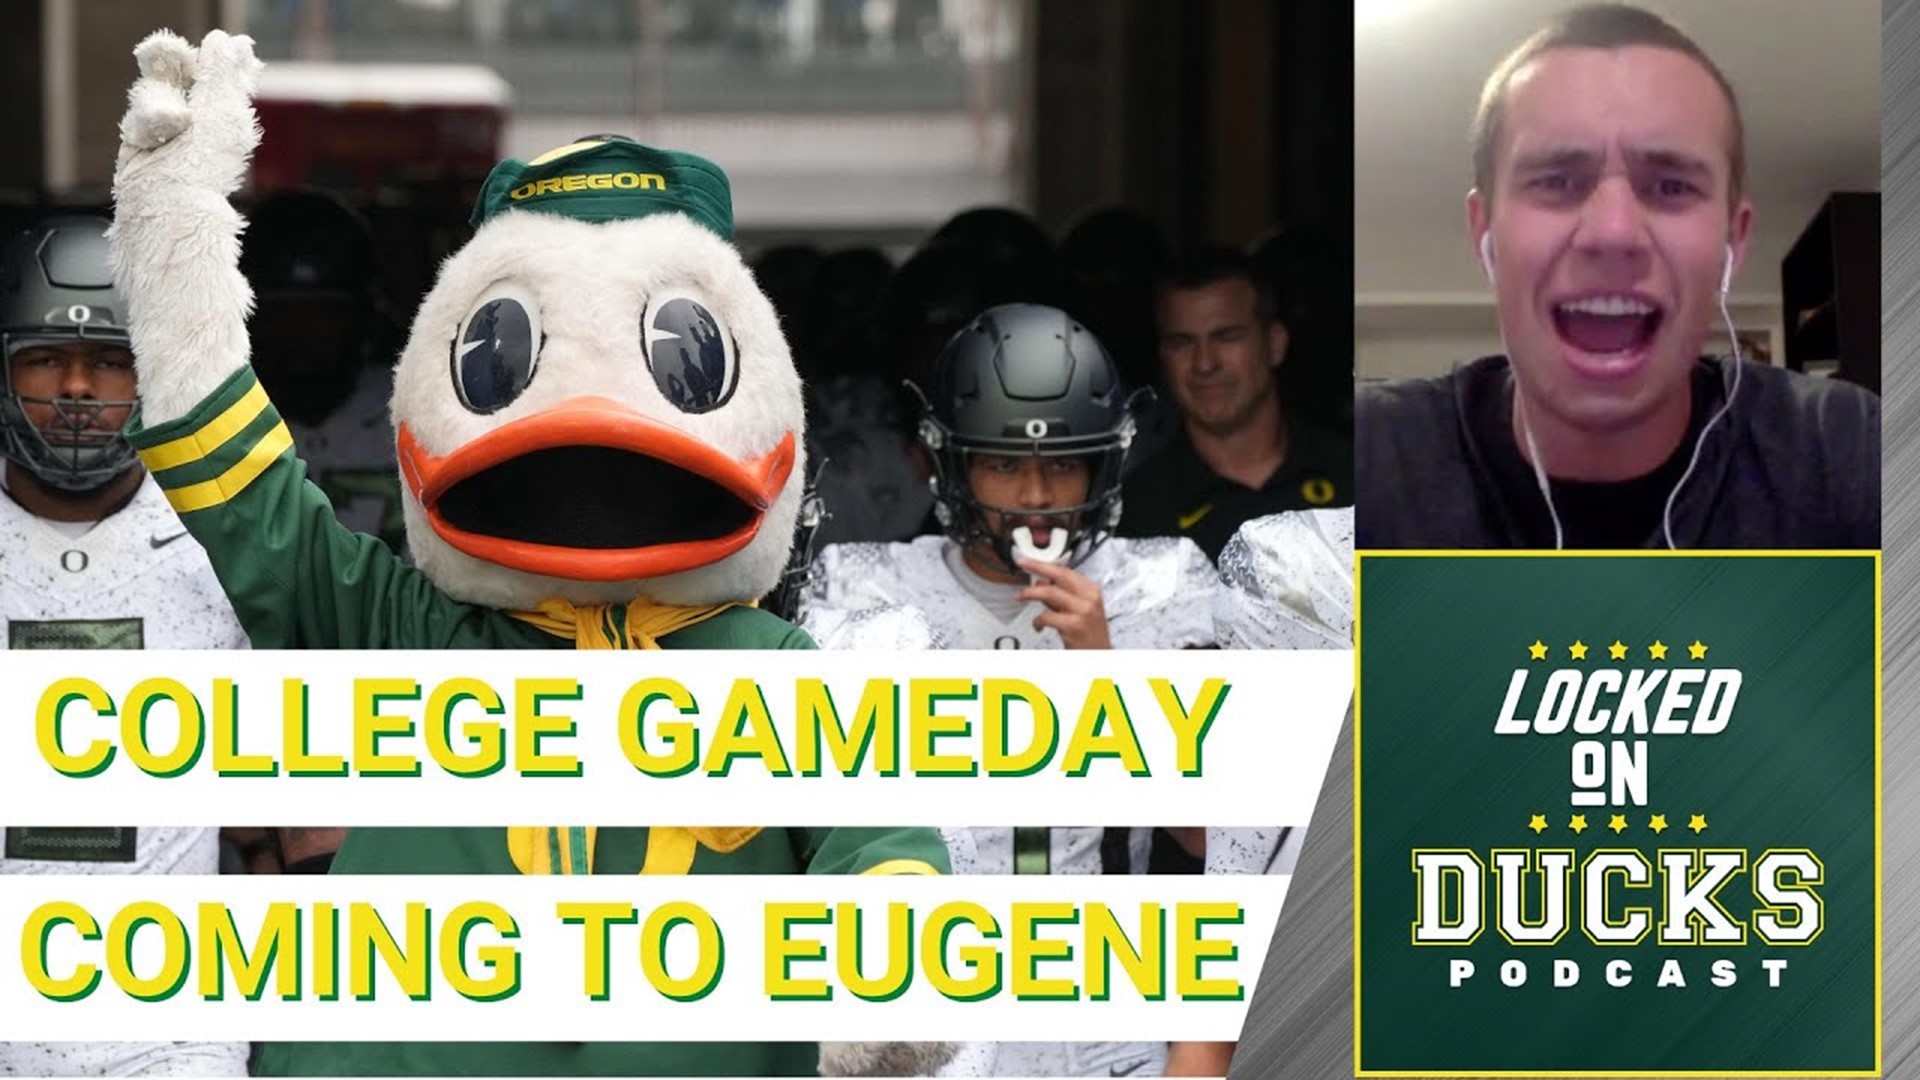 For the first time since 2018, ESPN's College GameDay will be live from Eugene, Oregon for a Top-10 matchup between Oregon and UCLA.